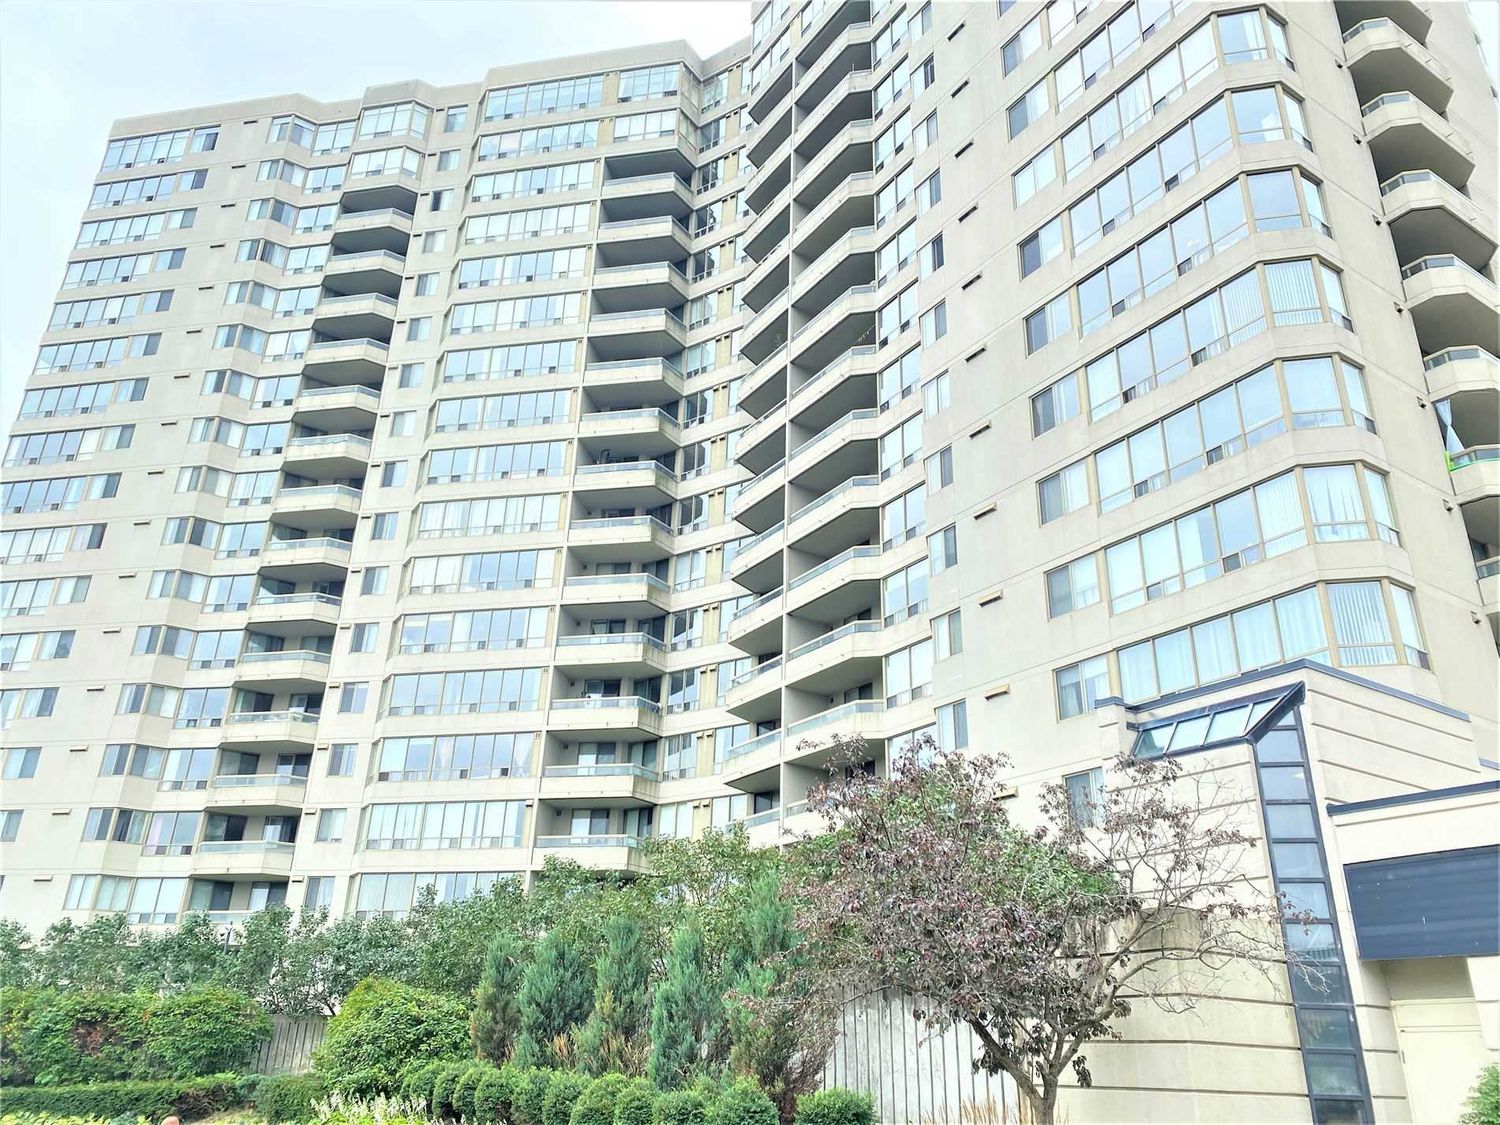 150 Alton Towers Circ. Optima on the Park I Condos is located in  Scarborough, Toronto - image #2 of 2